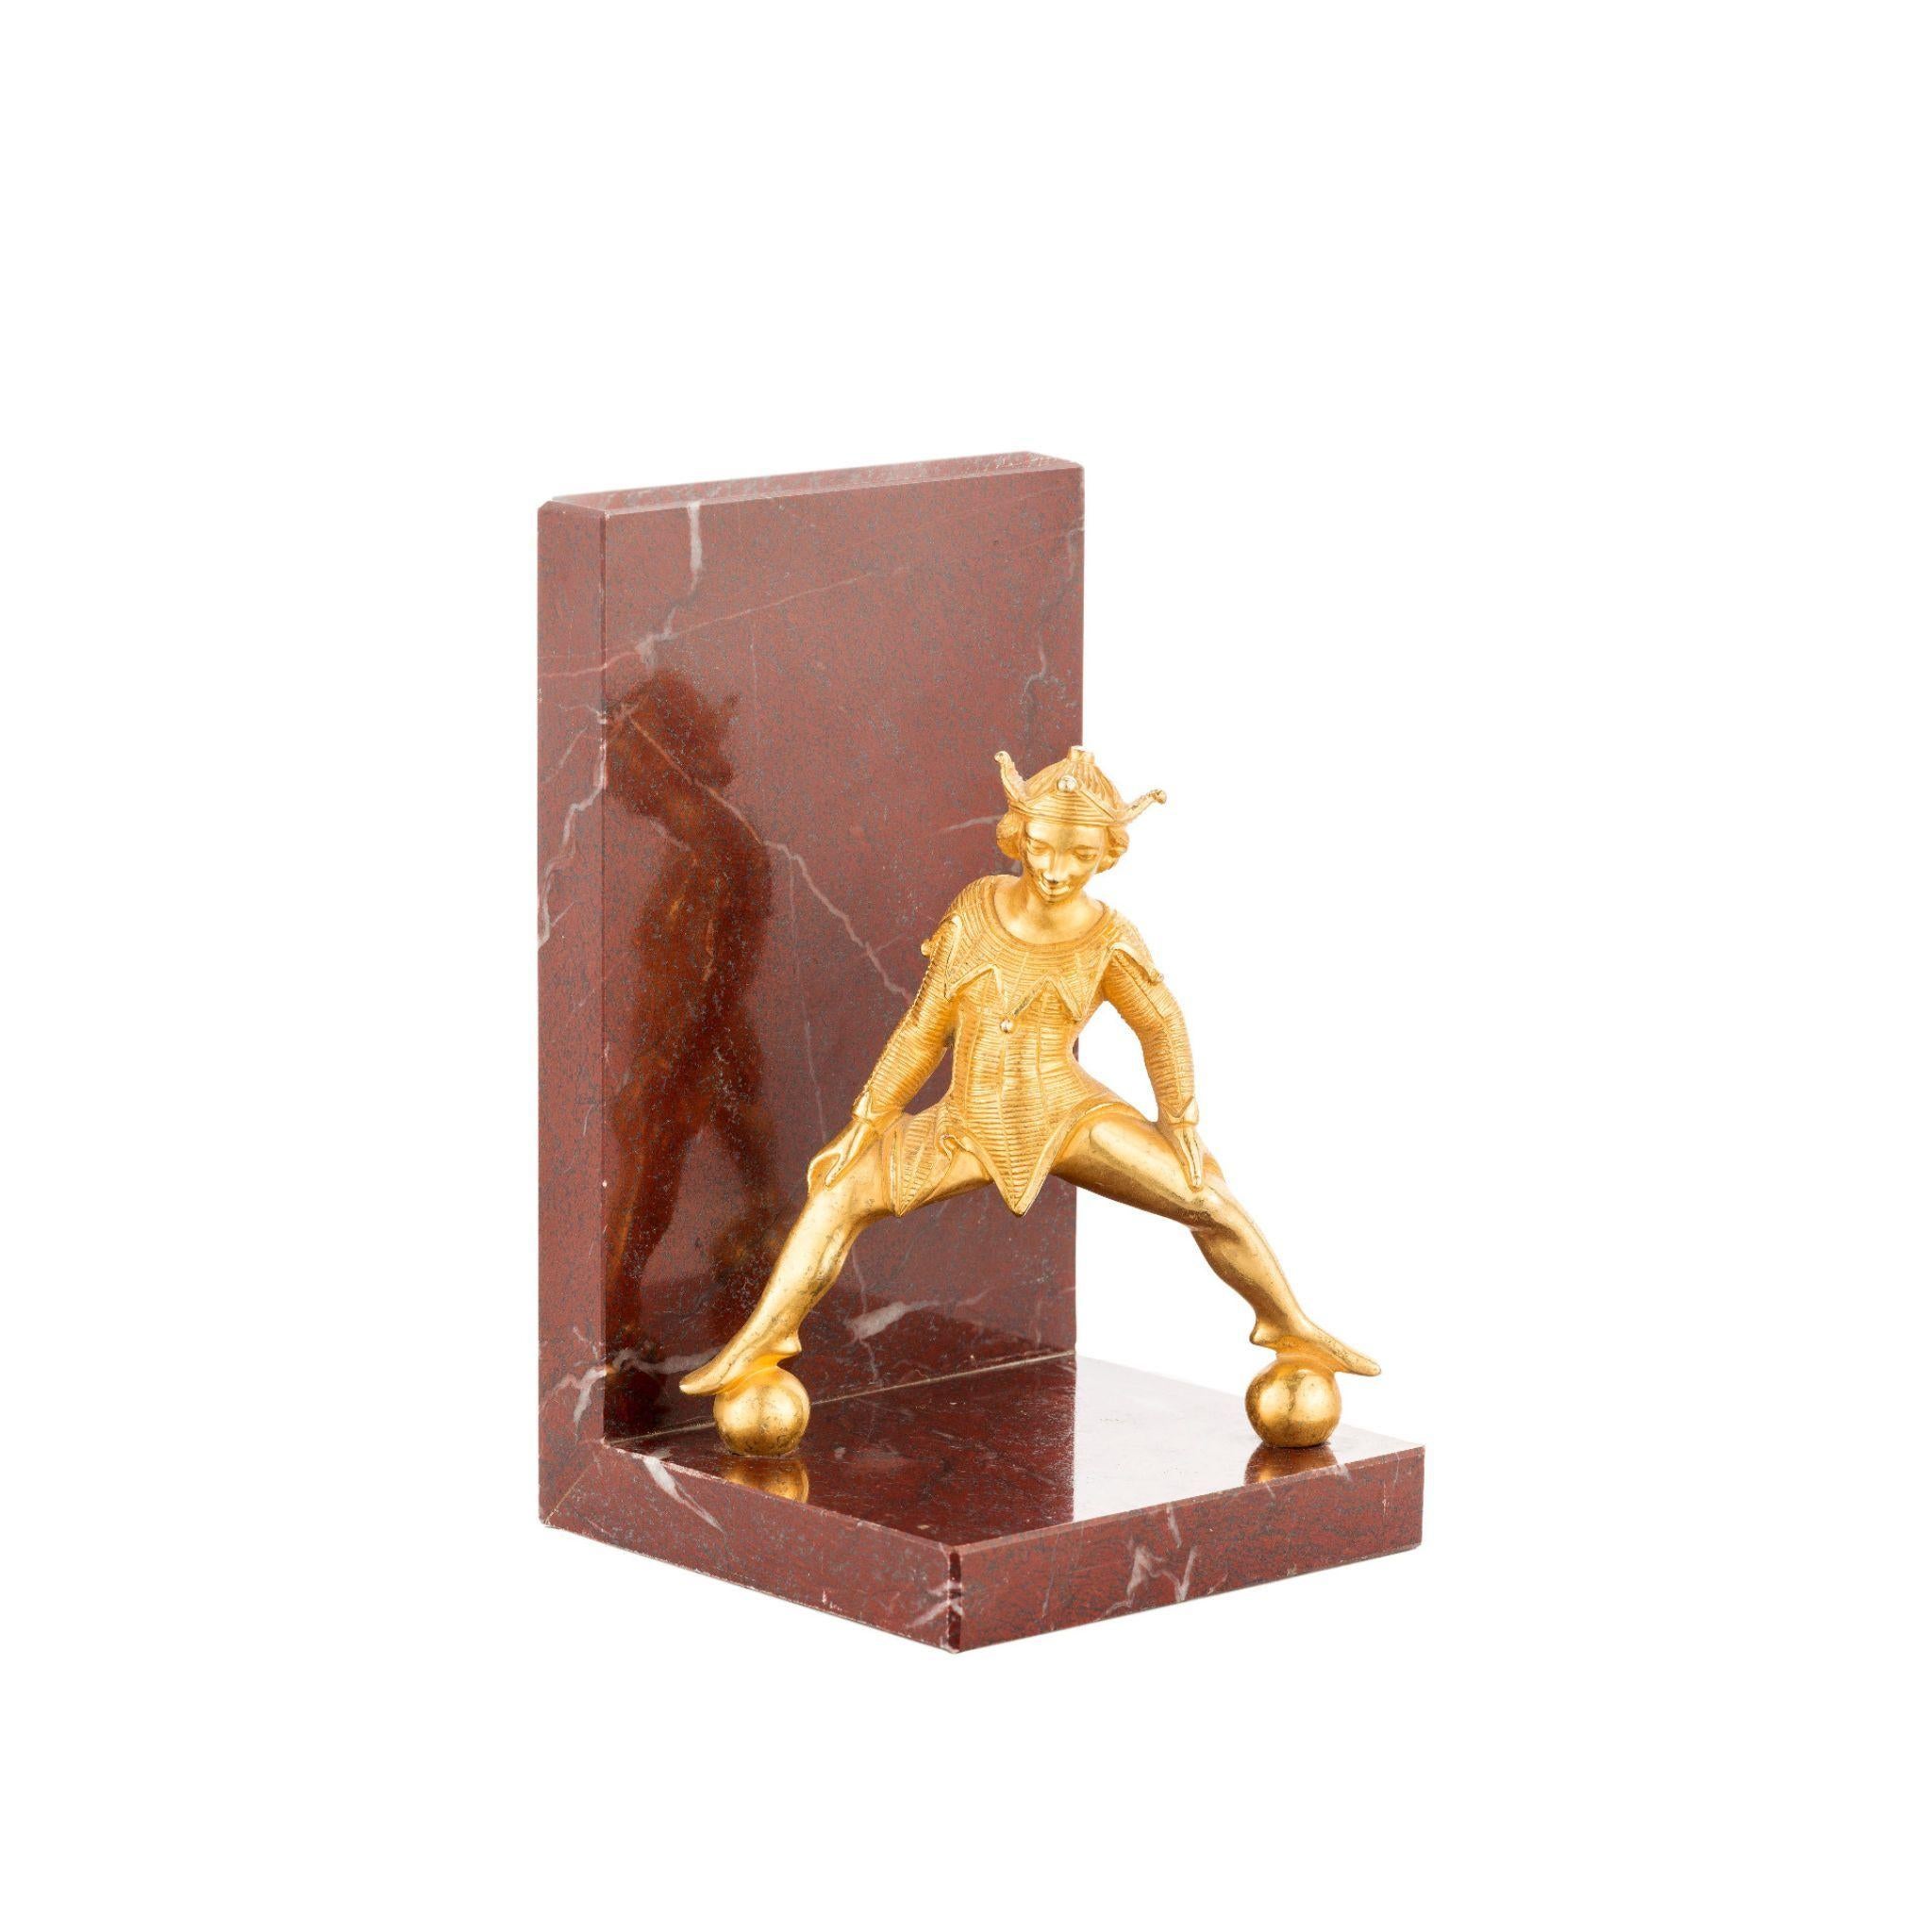 Add a touch of playfulness to your living space with our striking marble bookend featuring a brass jester. Not only is it a unique and eye-catching piece, but it's also practical for holding your books in place. Shop now and give your decor a touch